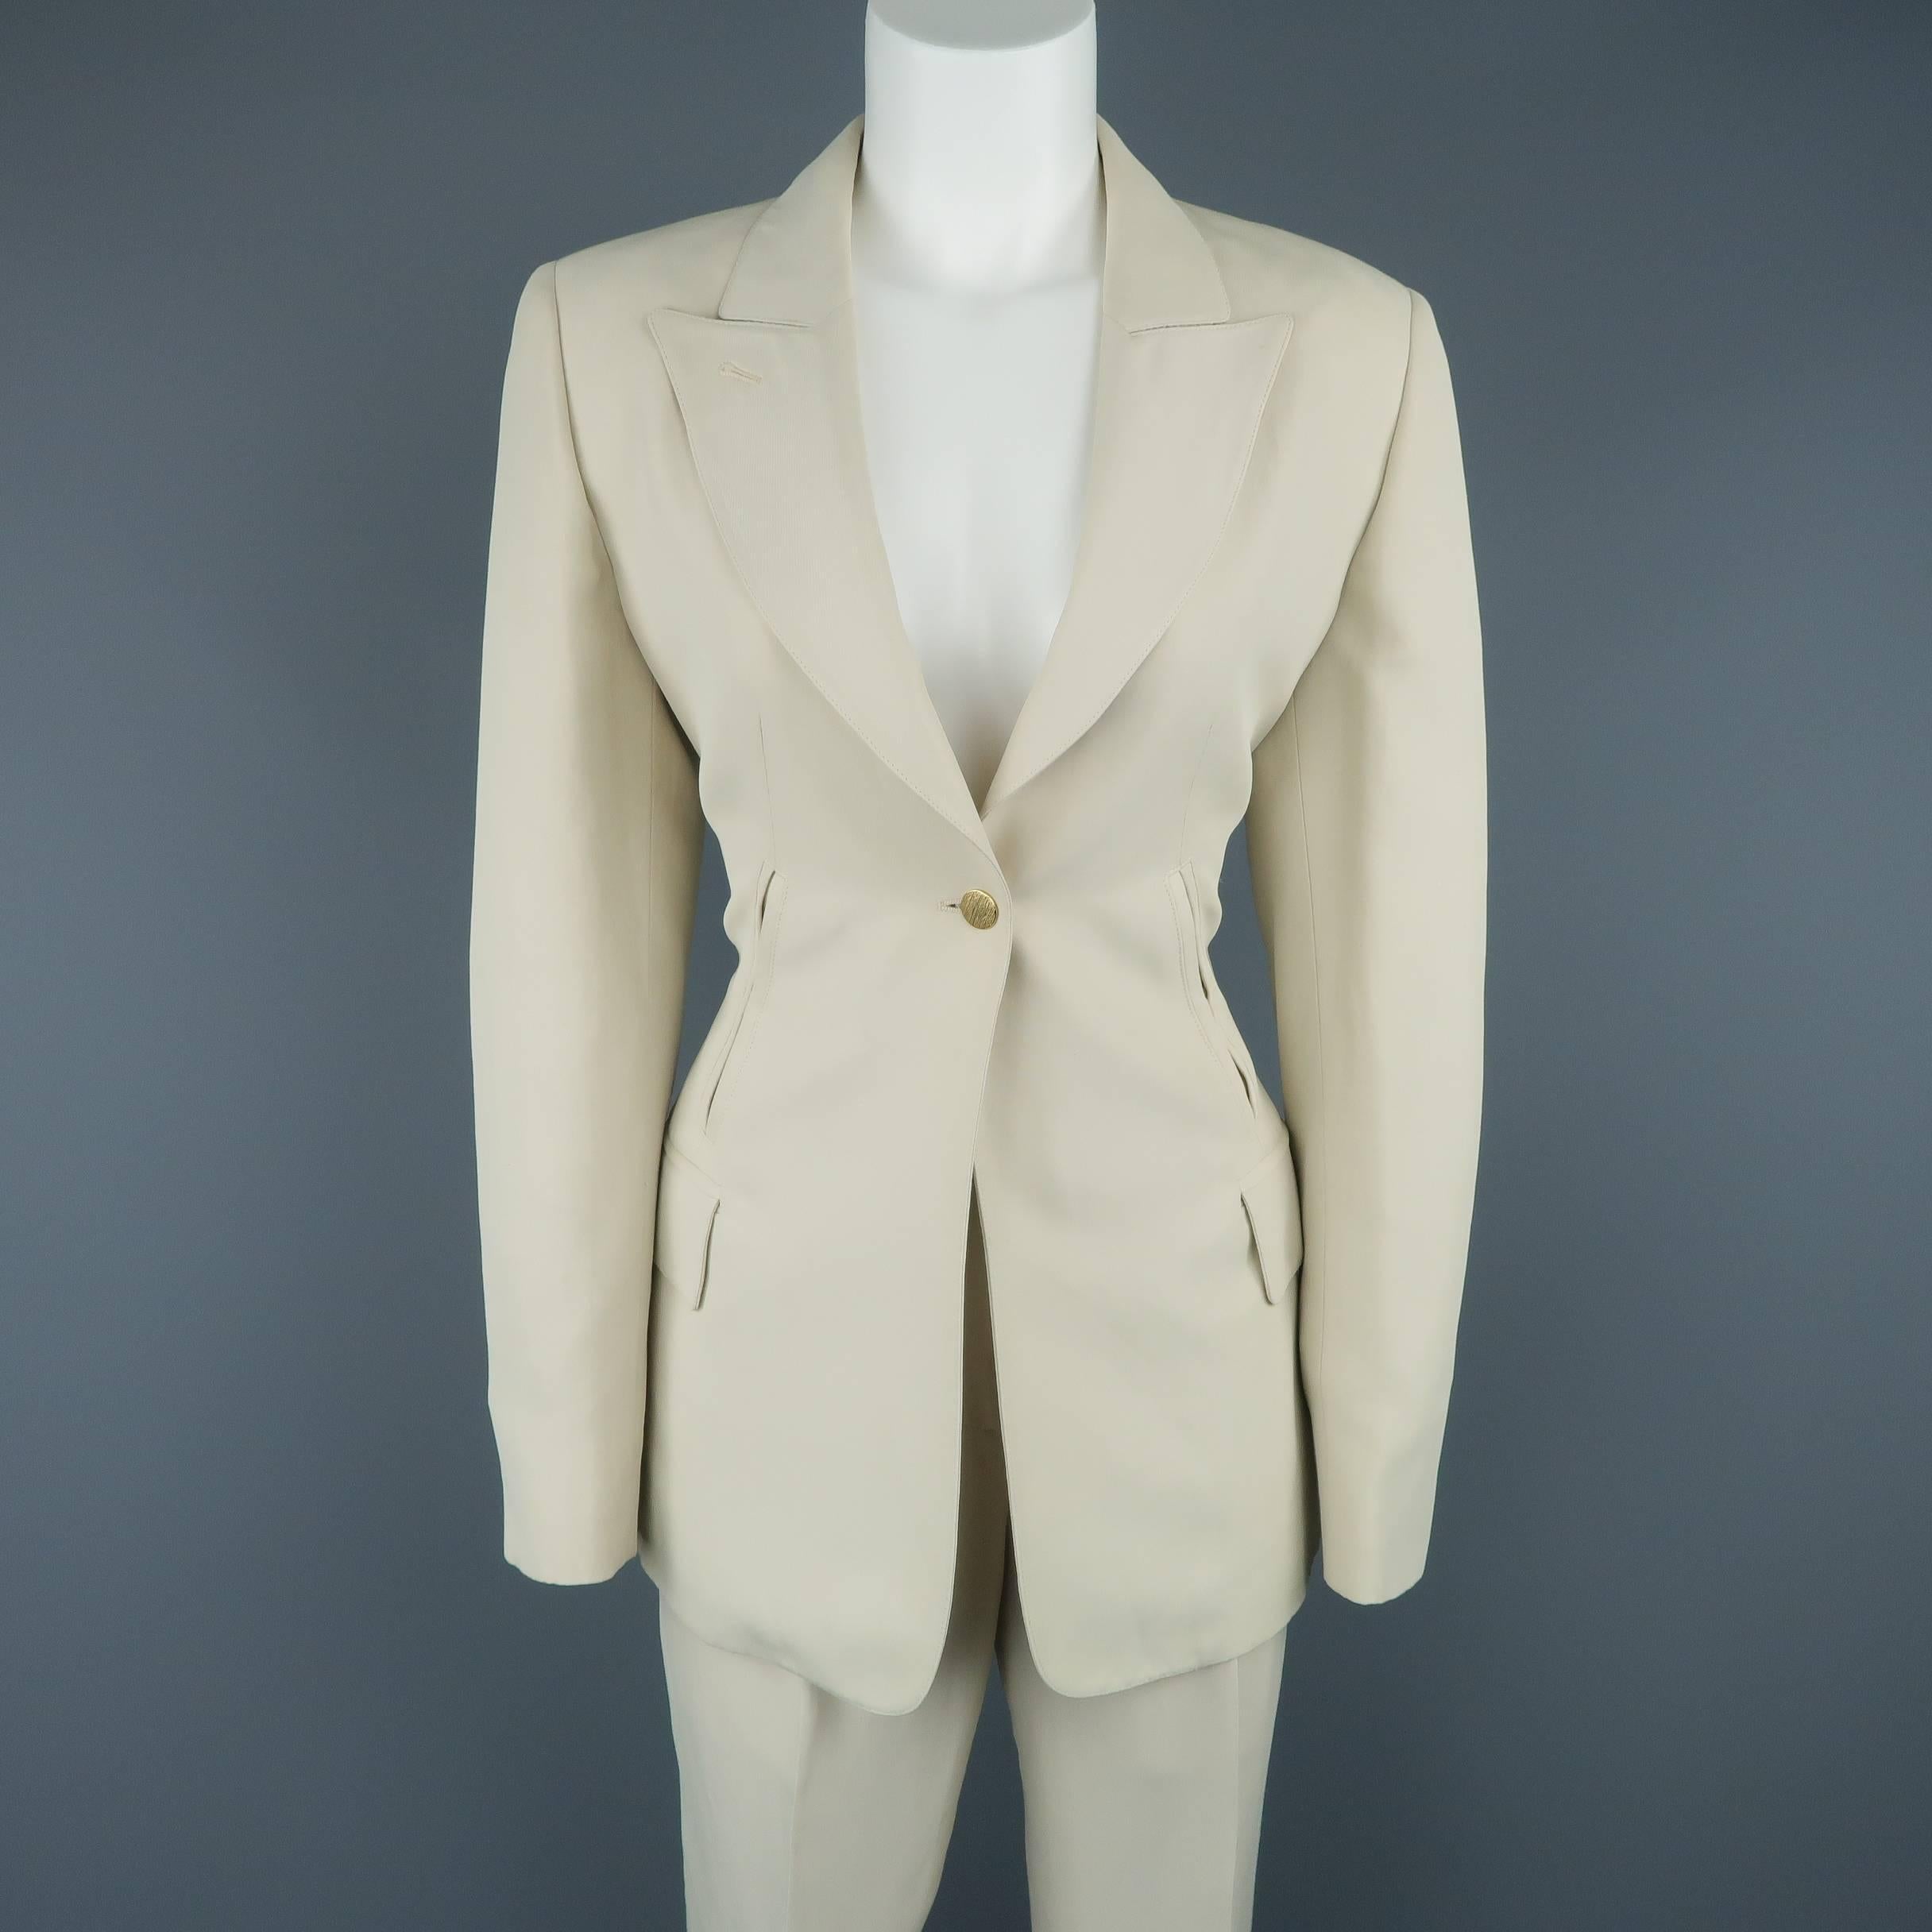 Vintage CLAUDE MONTANA pants suit comes in a light khaki beige twill with a sheen and includes a single button, peak lapel jacket with slit and flap pockets and matching trousers. Minor wear and spot on back of sleeve. As-is. Made in Italy.
 
Fair